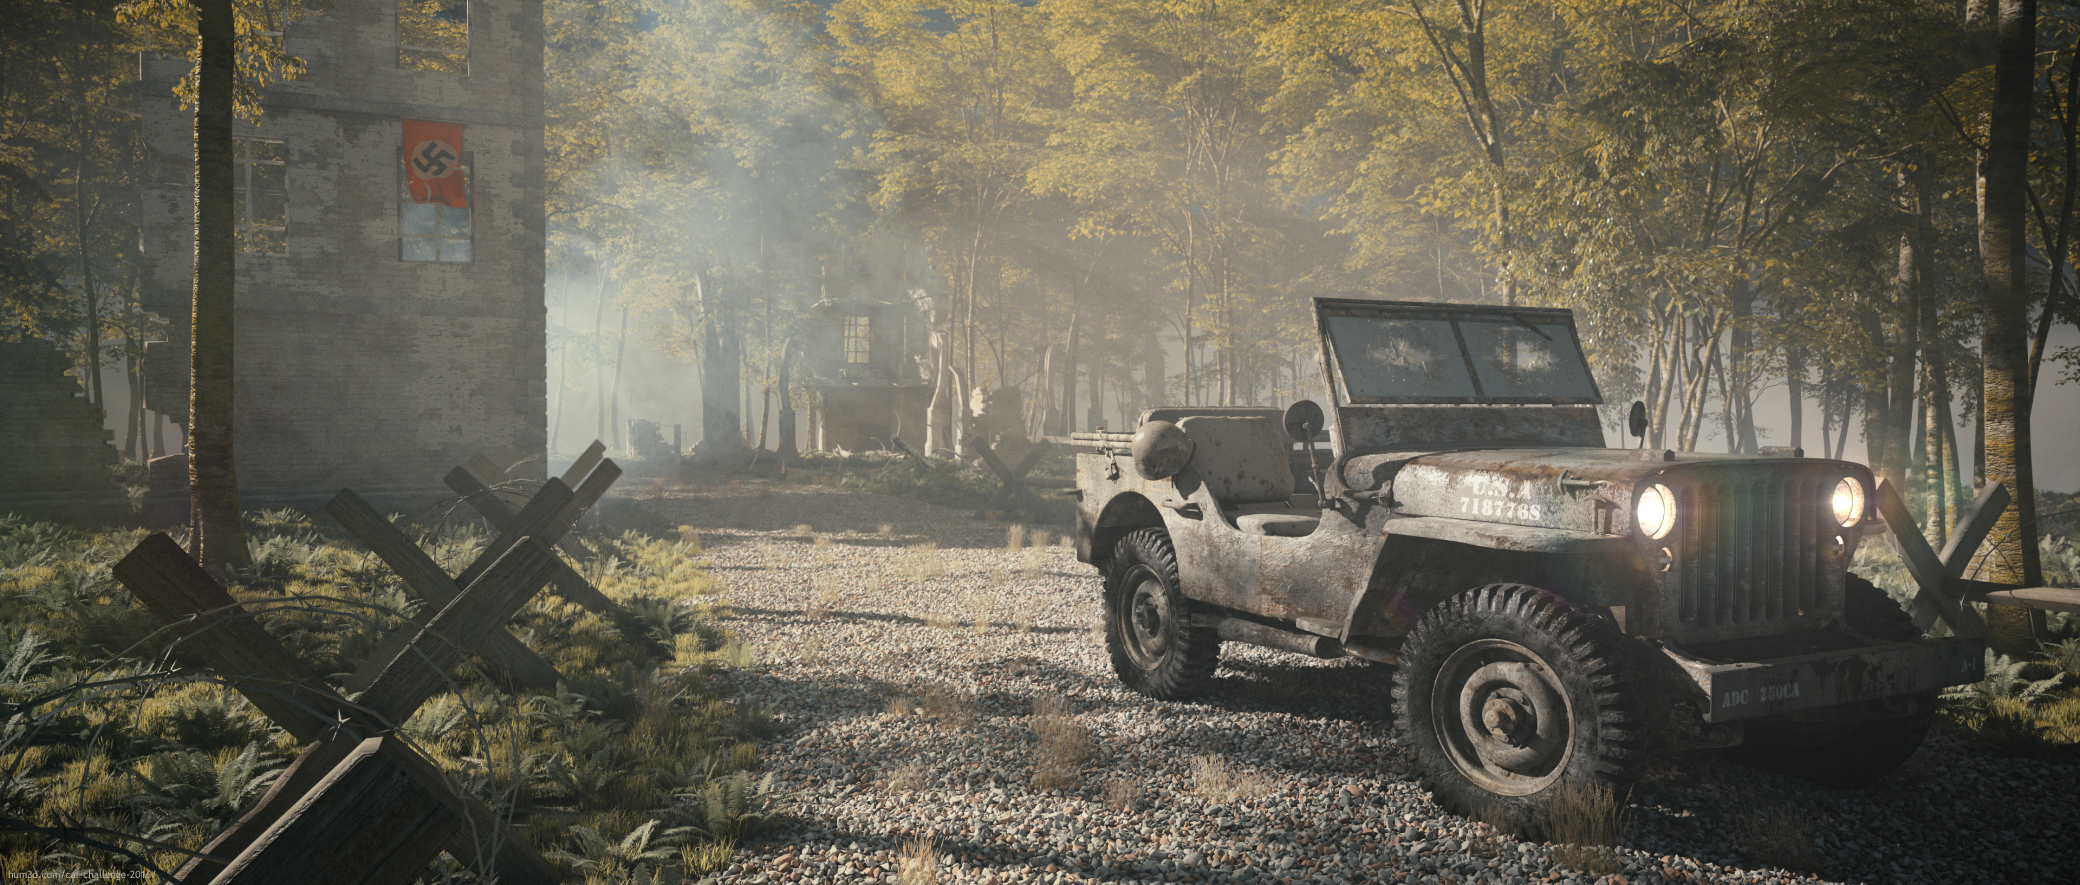 Willys jeep resting 3d art